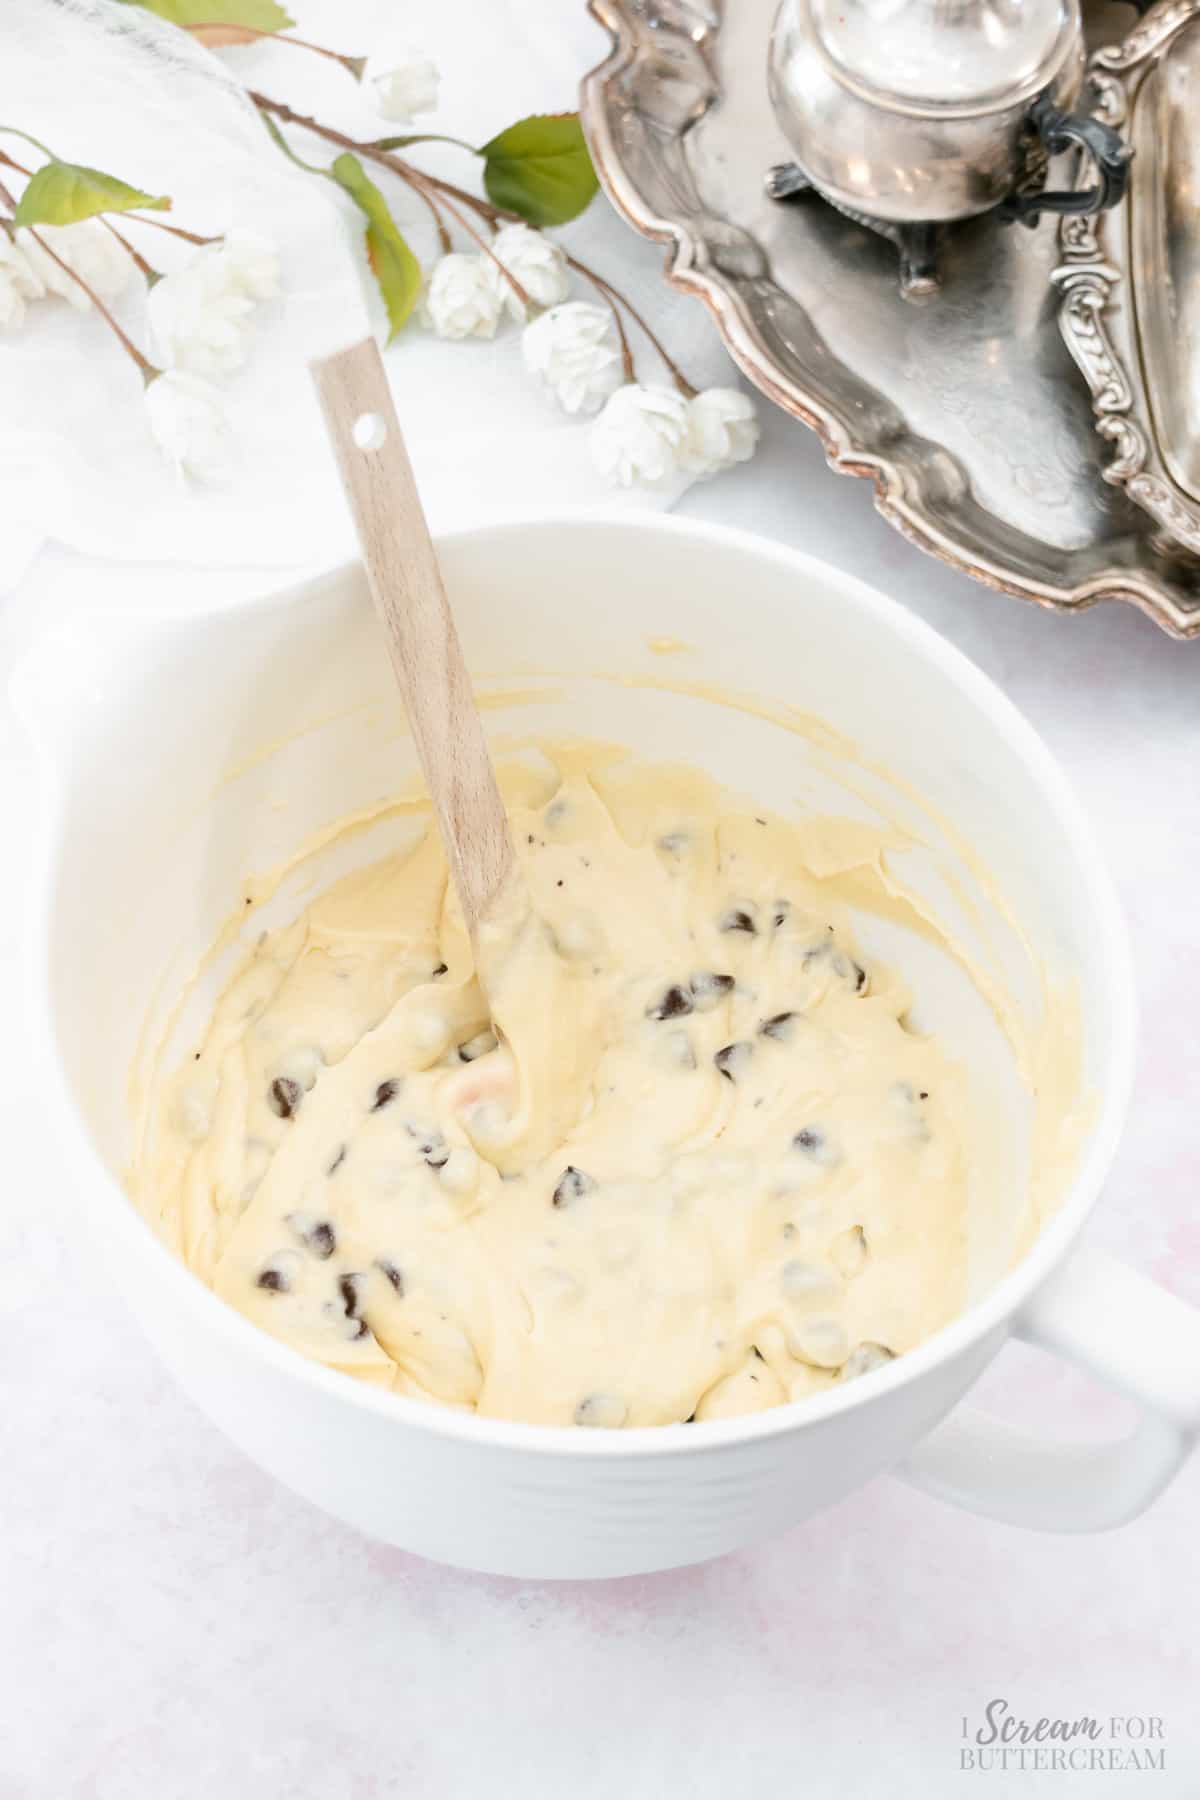 Bowl with chocolate chips added to batter.